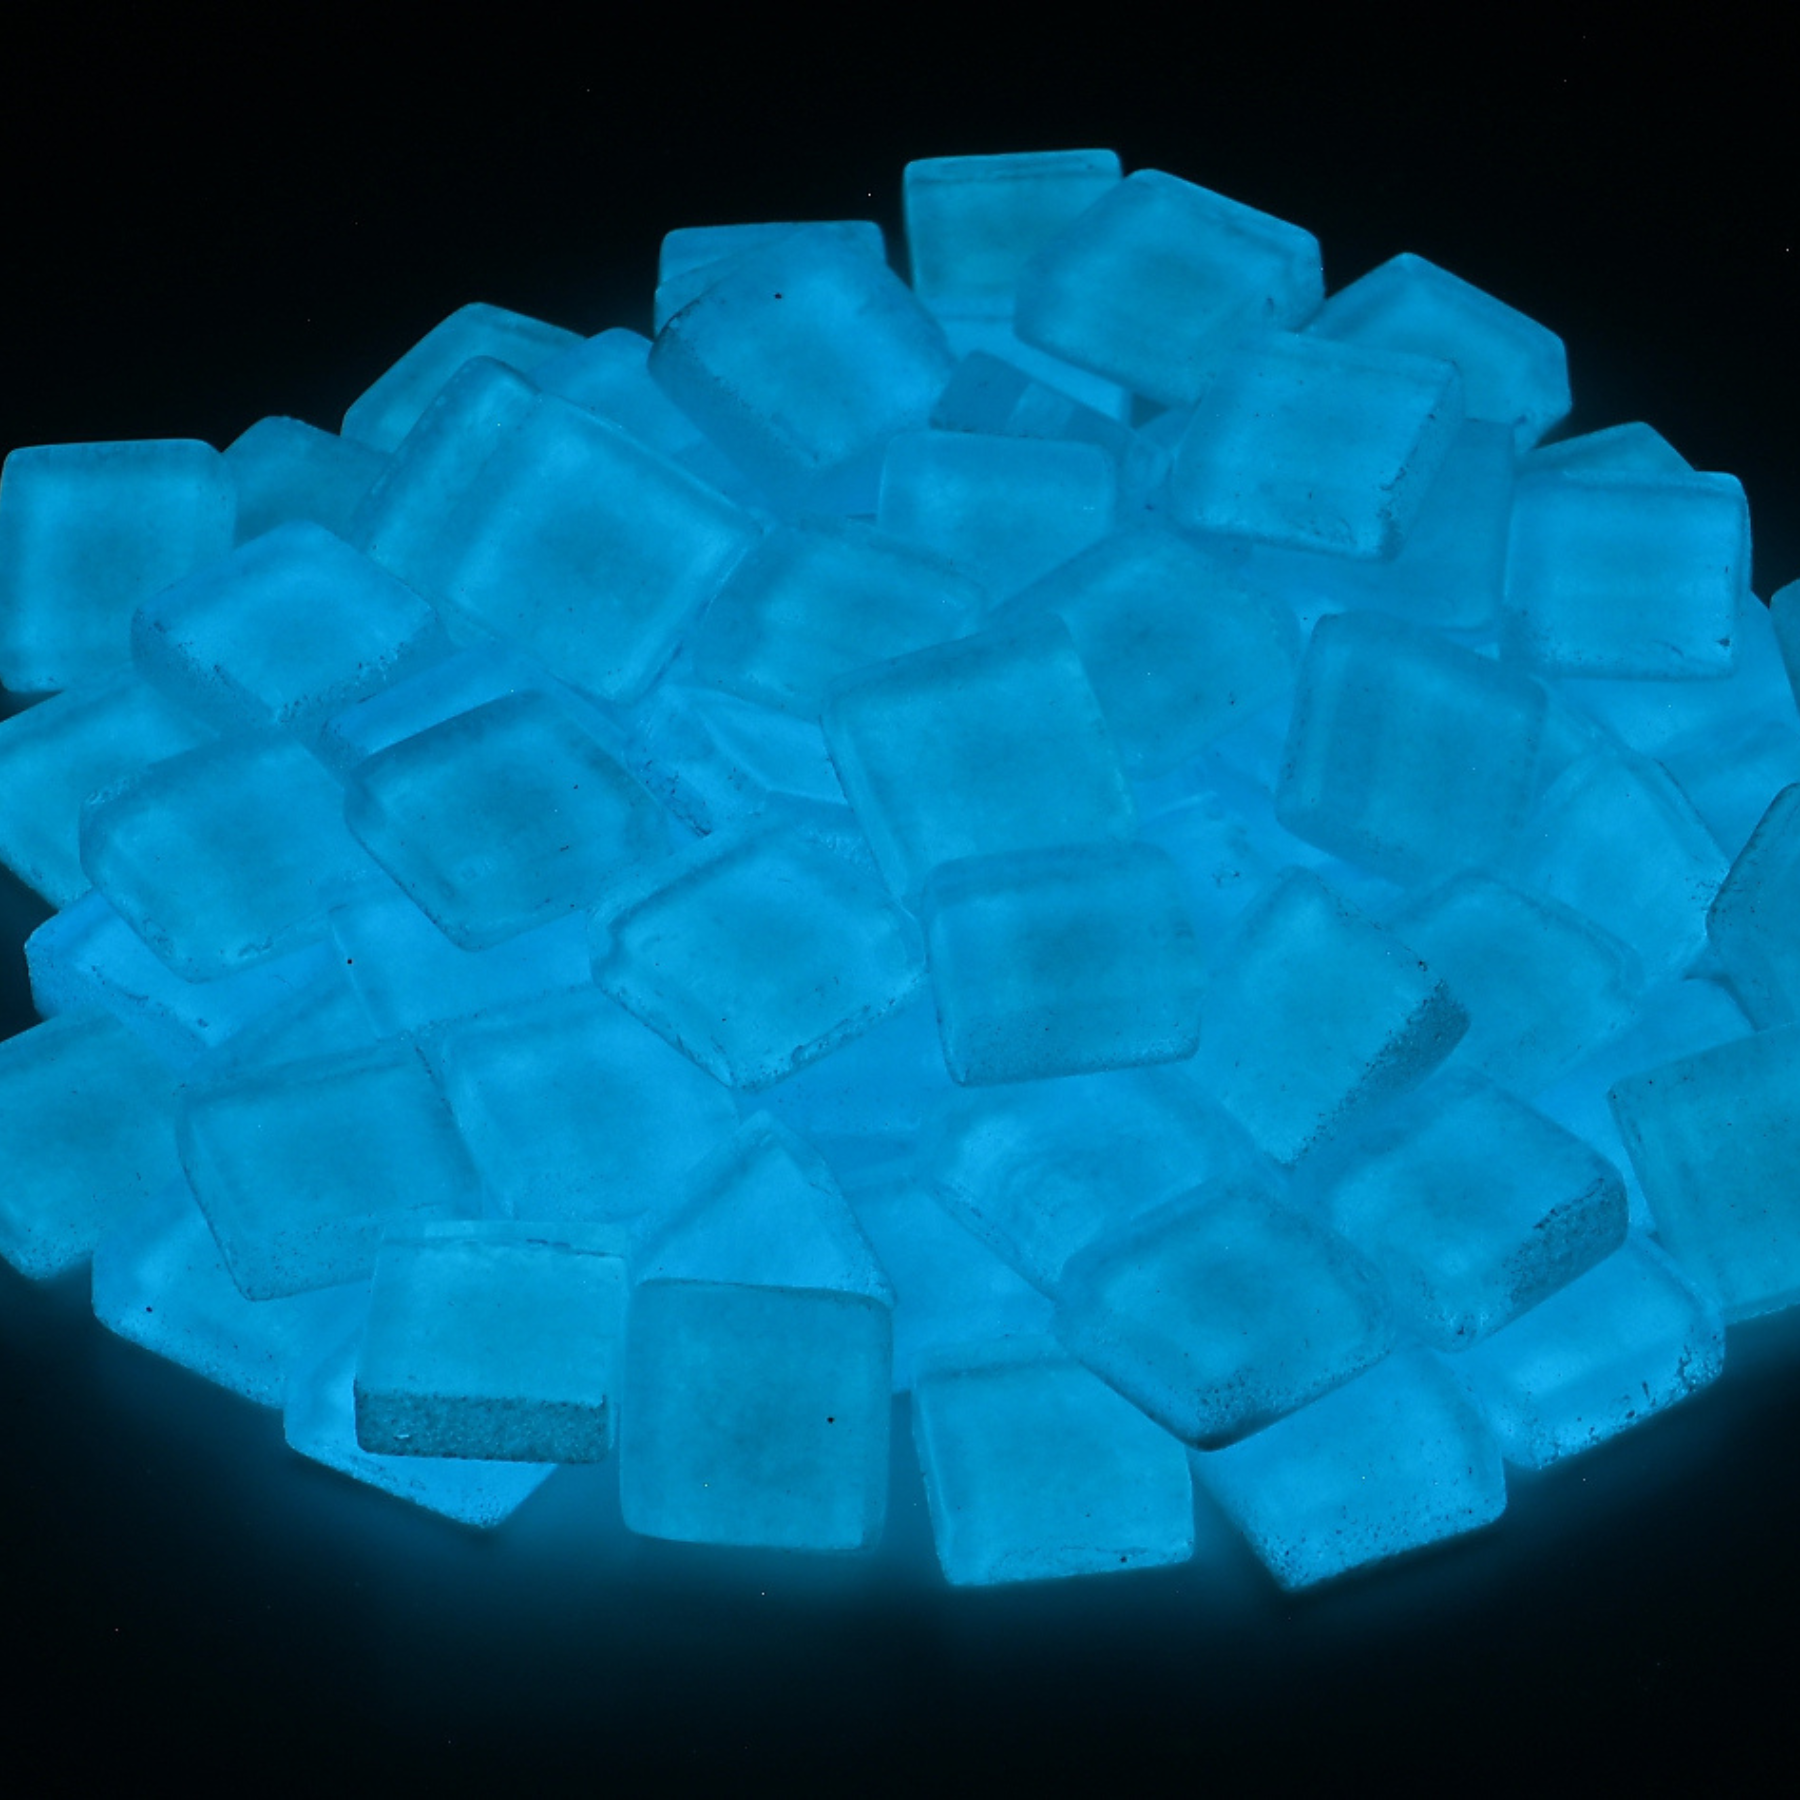 Soft Glass Squares - Blue Glow In The Dark - *DISCONTINUED*